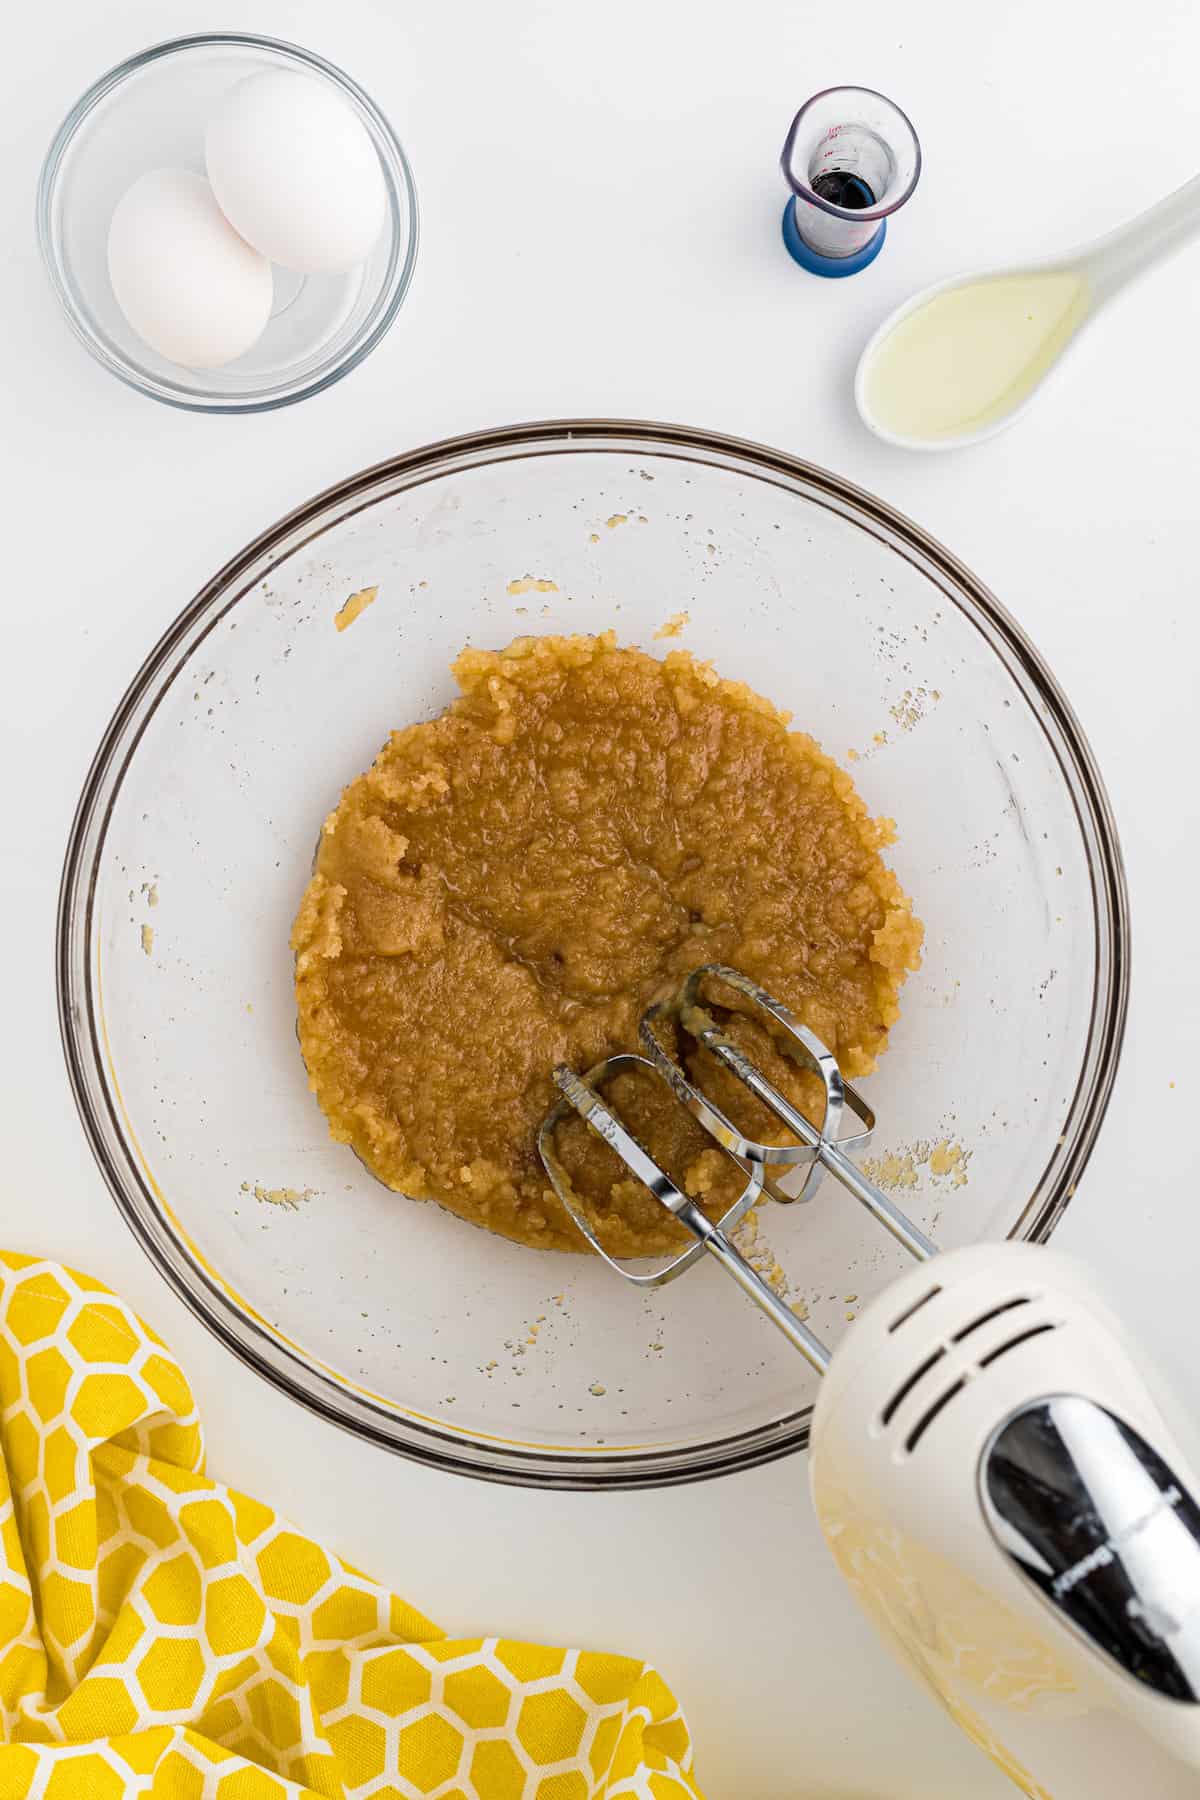 Melted butter and sugars being mixed together with a hand mixer